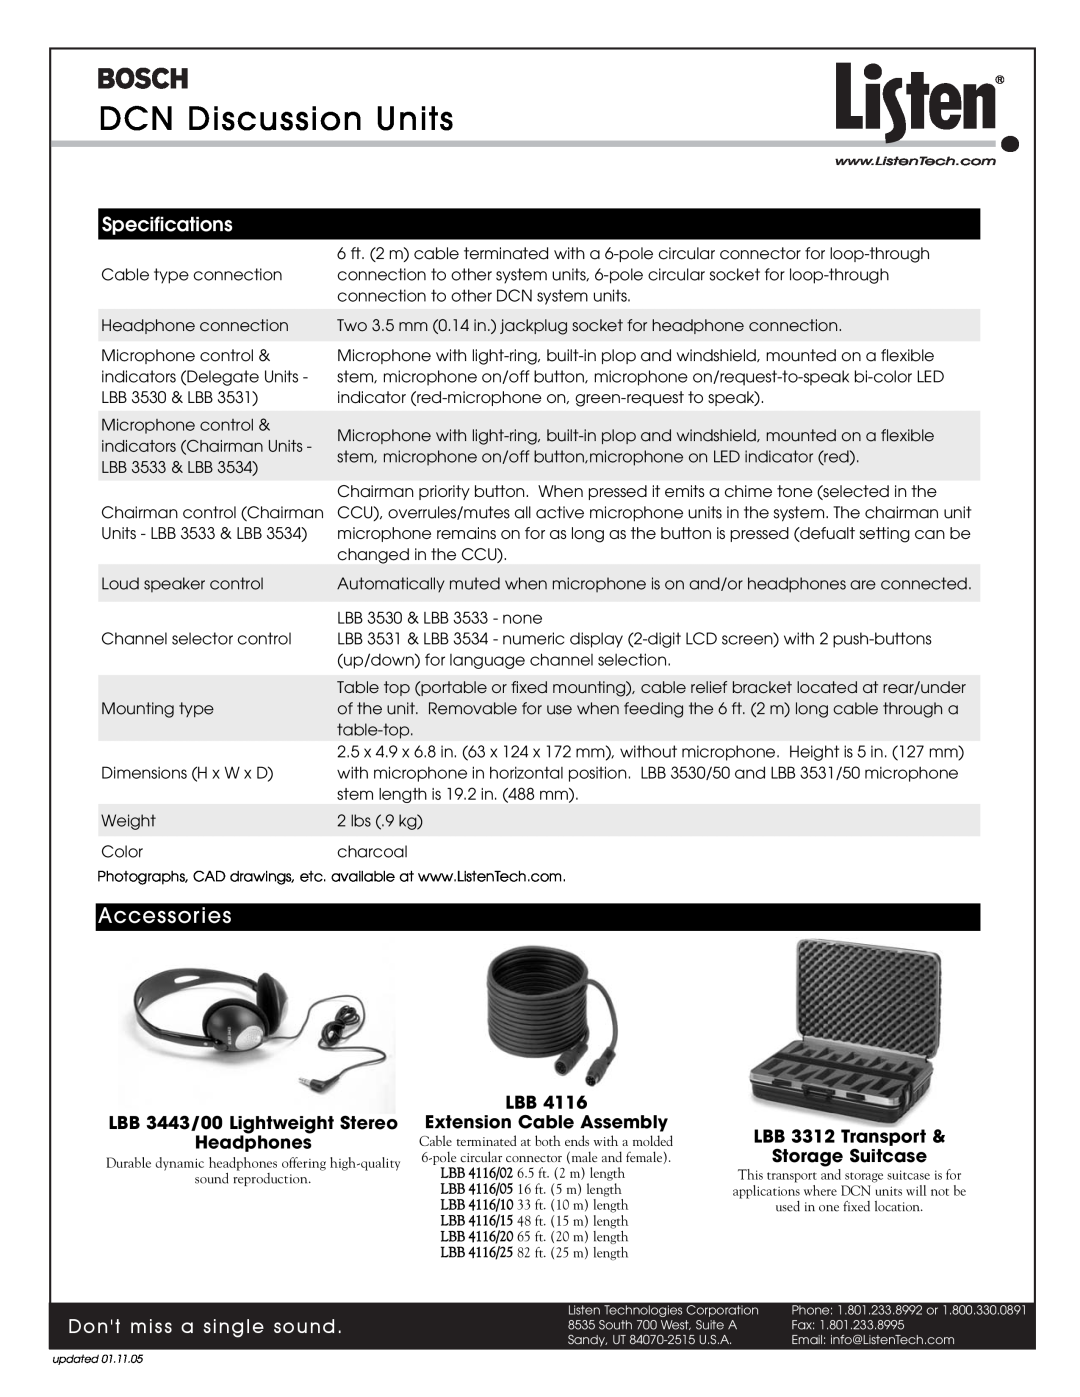 Listen Technologies LBB 3530/50, LBB 3530/00 DCN Discussion Units, Accessories, Specifications, Dont miss a single sound 